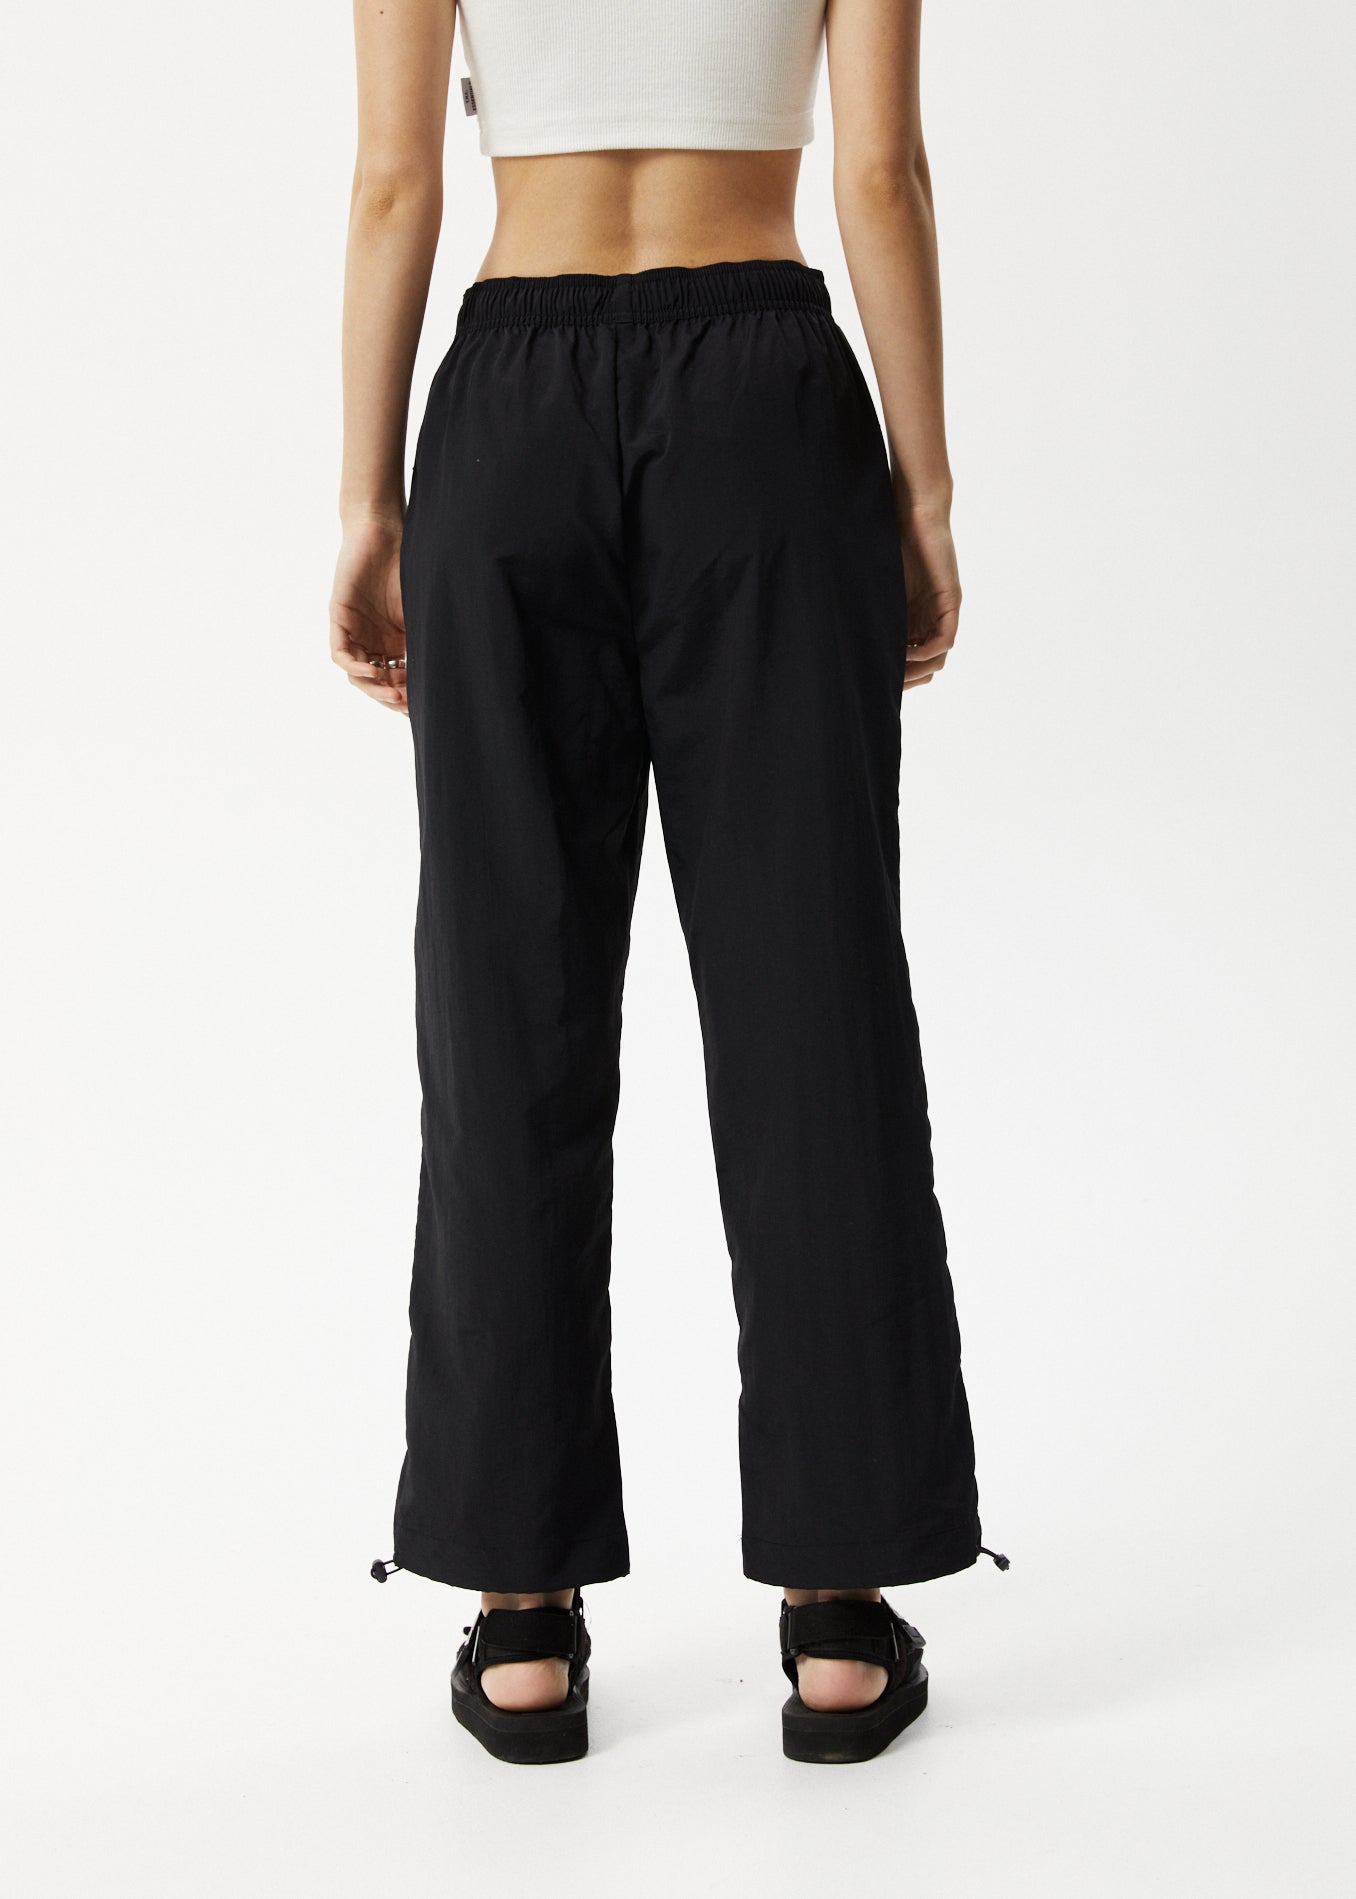 Afends Womens Octave - Spray Pants - Black 